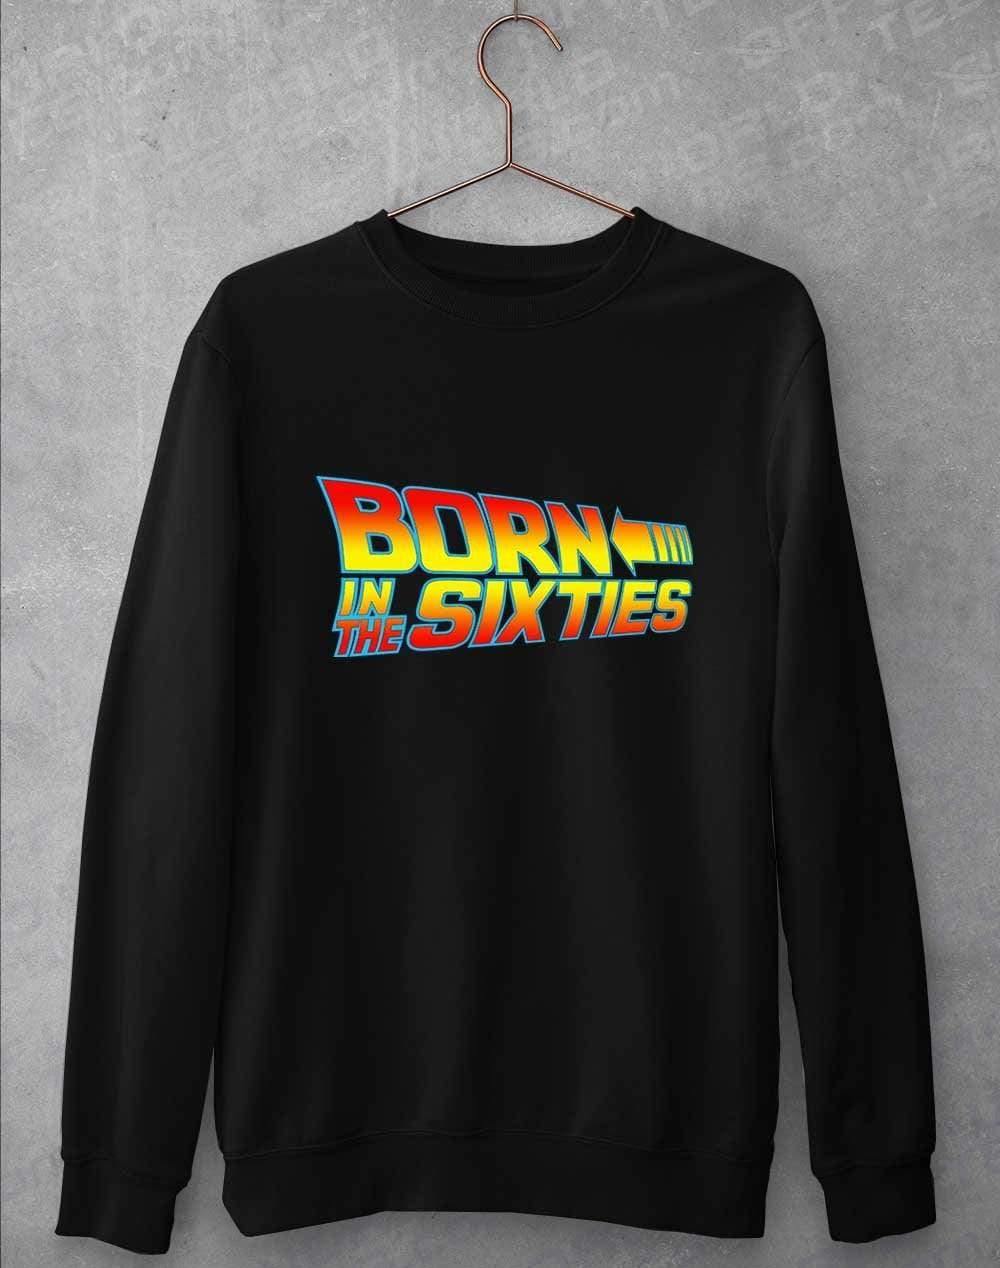 Born in the... (CHOOSE YOUR DECADE!) Sweatshirt 1960s - Black / S  - Off World Tees